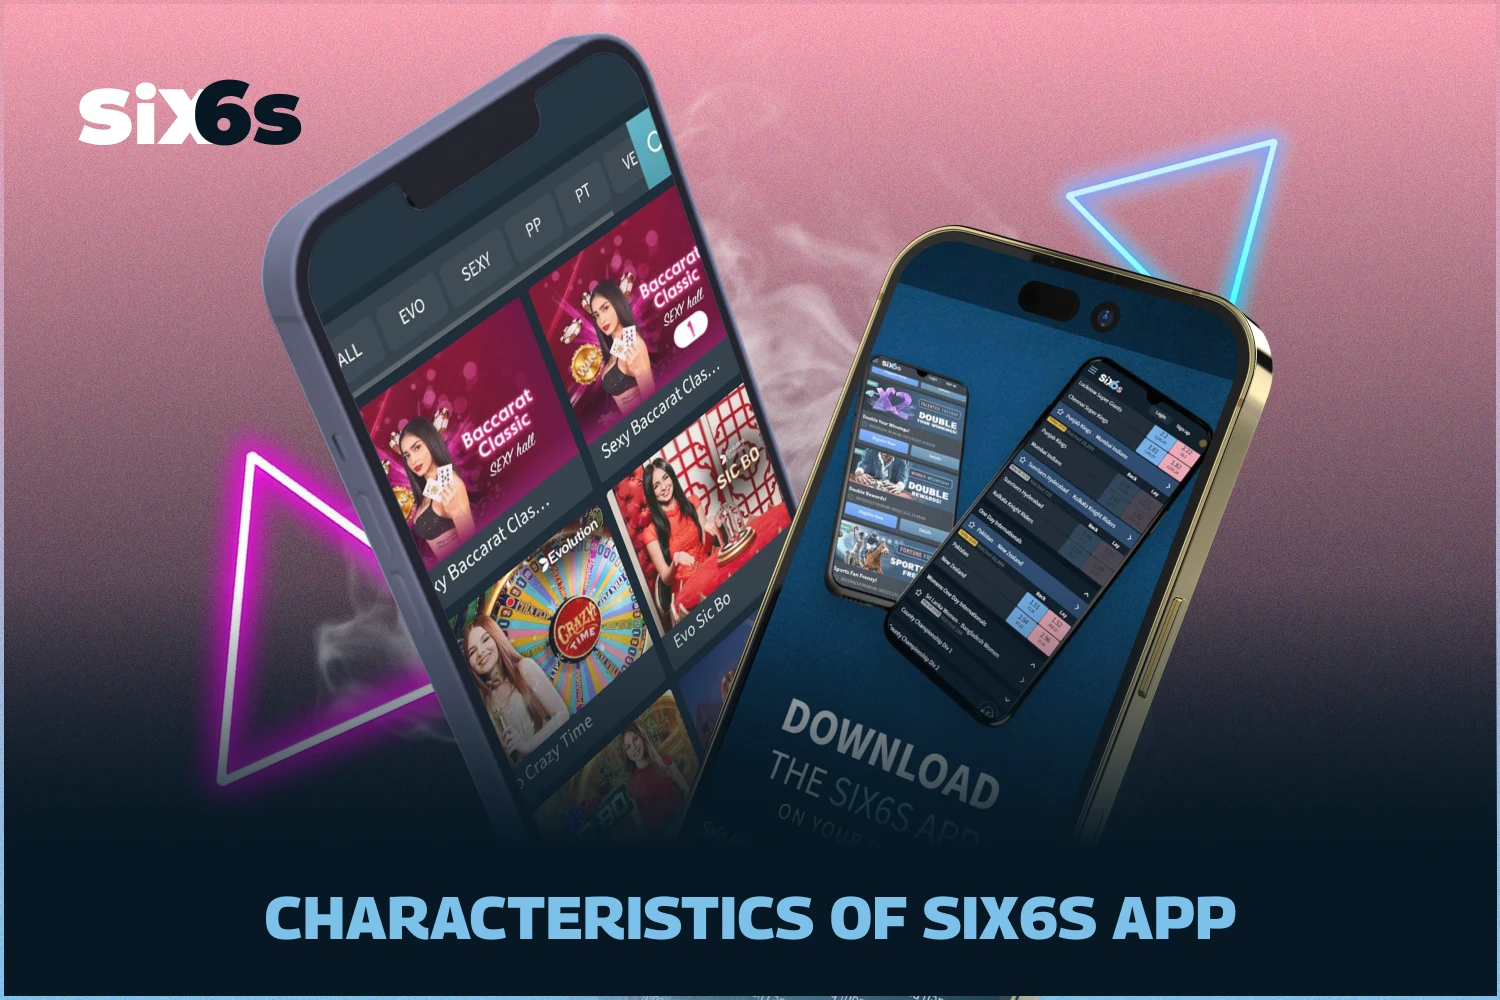 The Six6s app has excellent ratings and allows users from Bangladesh to have quick access to sports betting and casino games